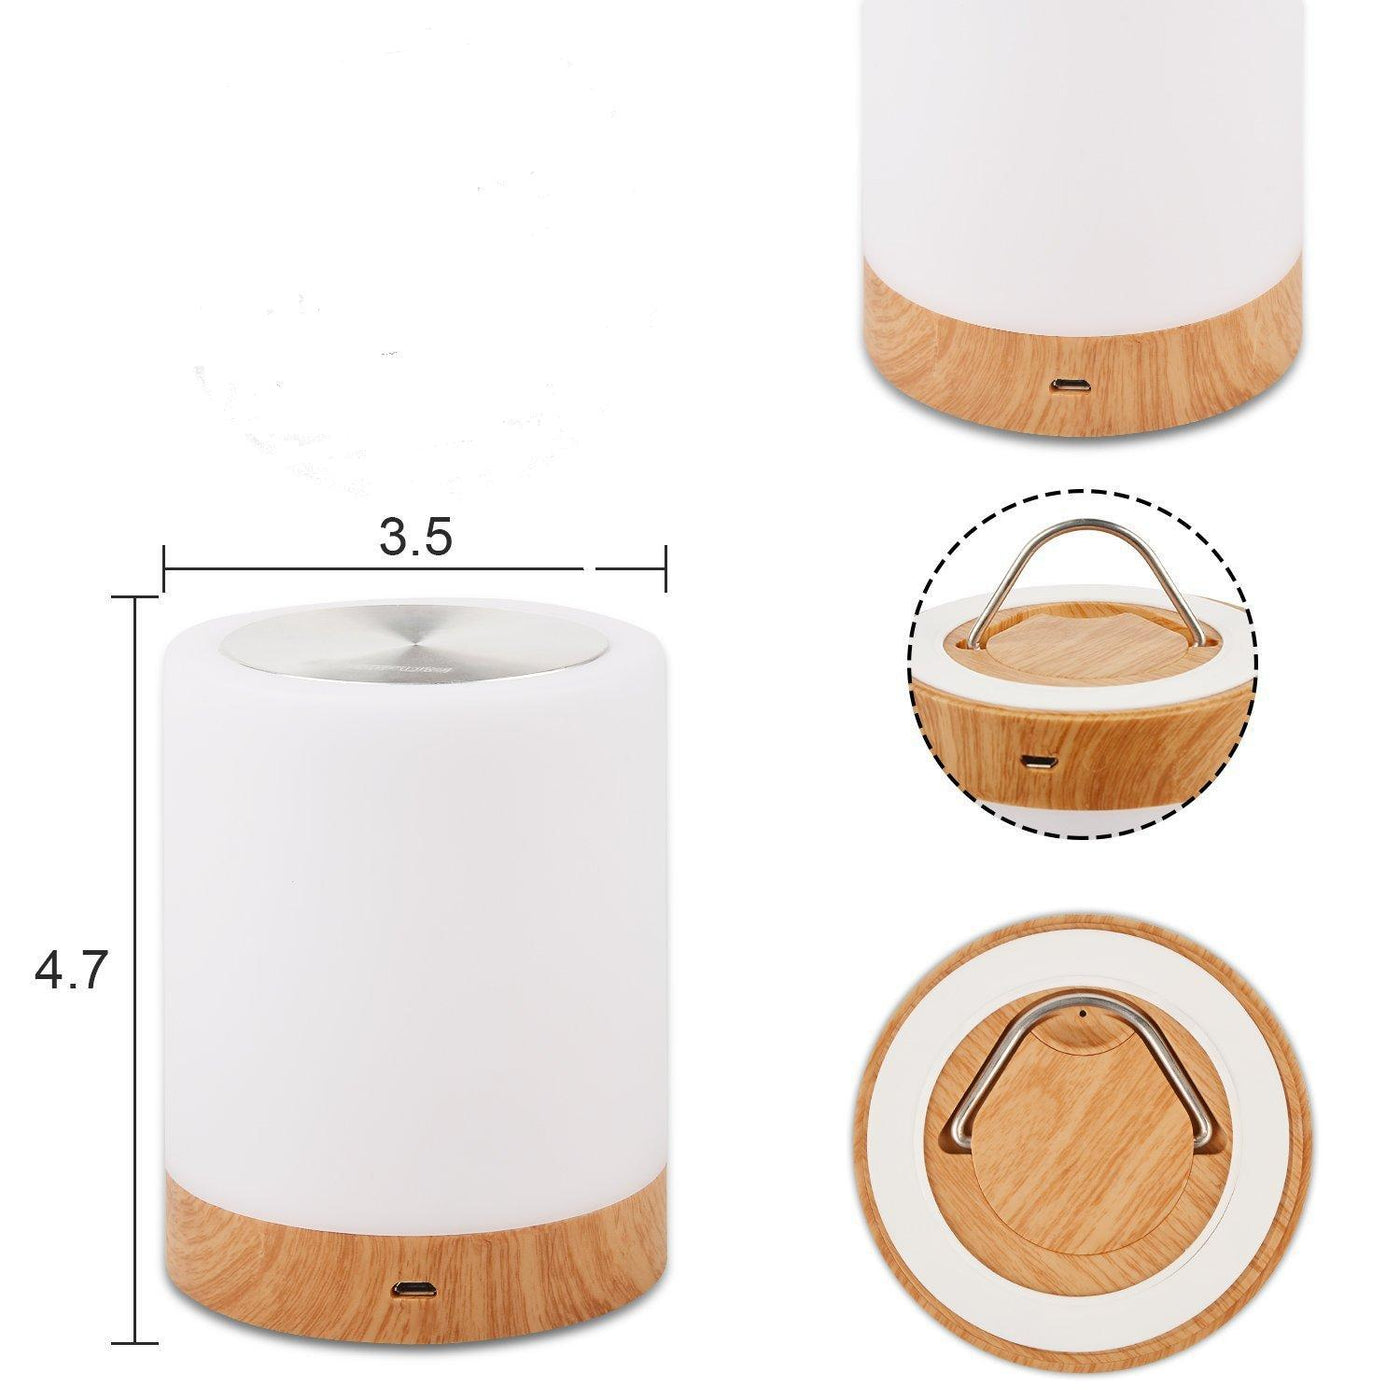 LED colorful creative wood grain charging night light atmosphere light